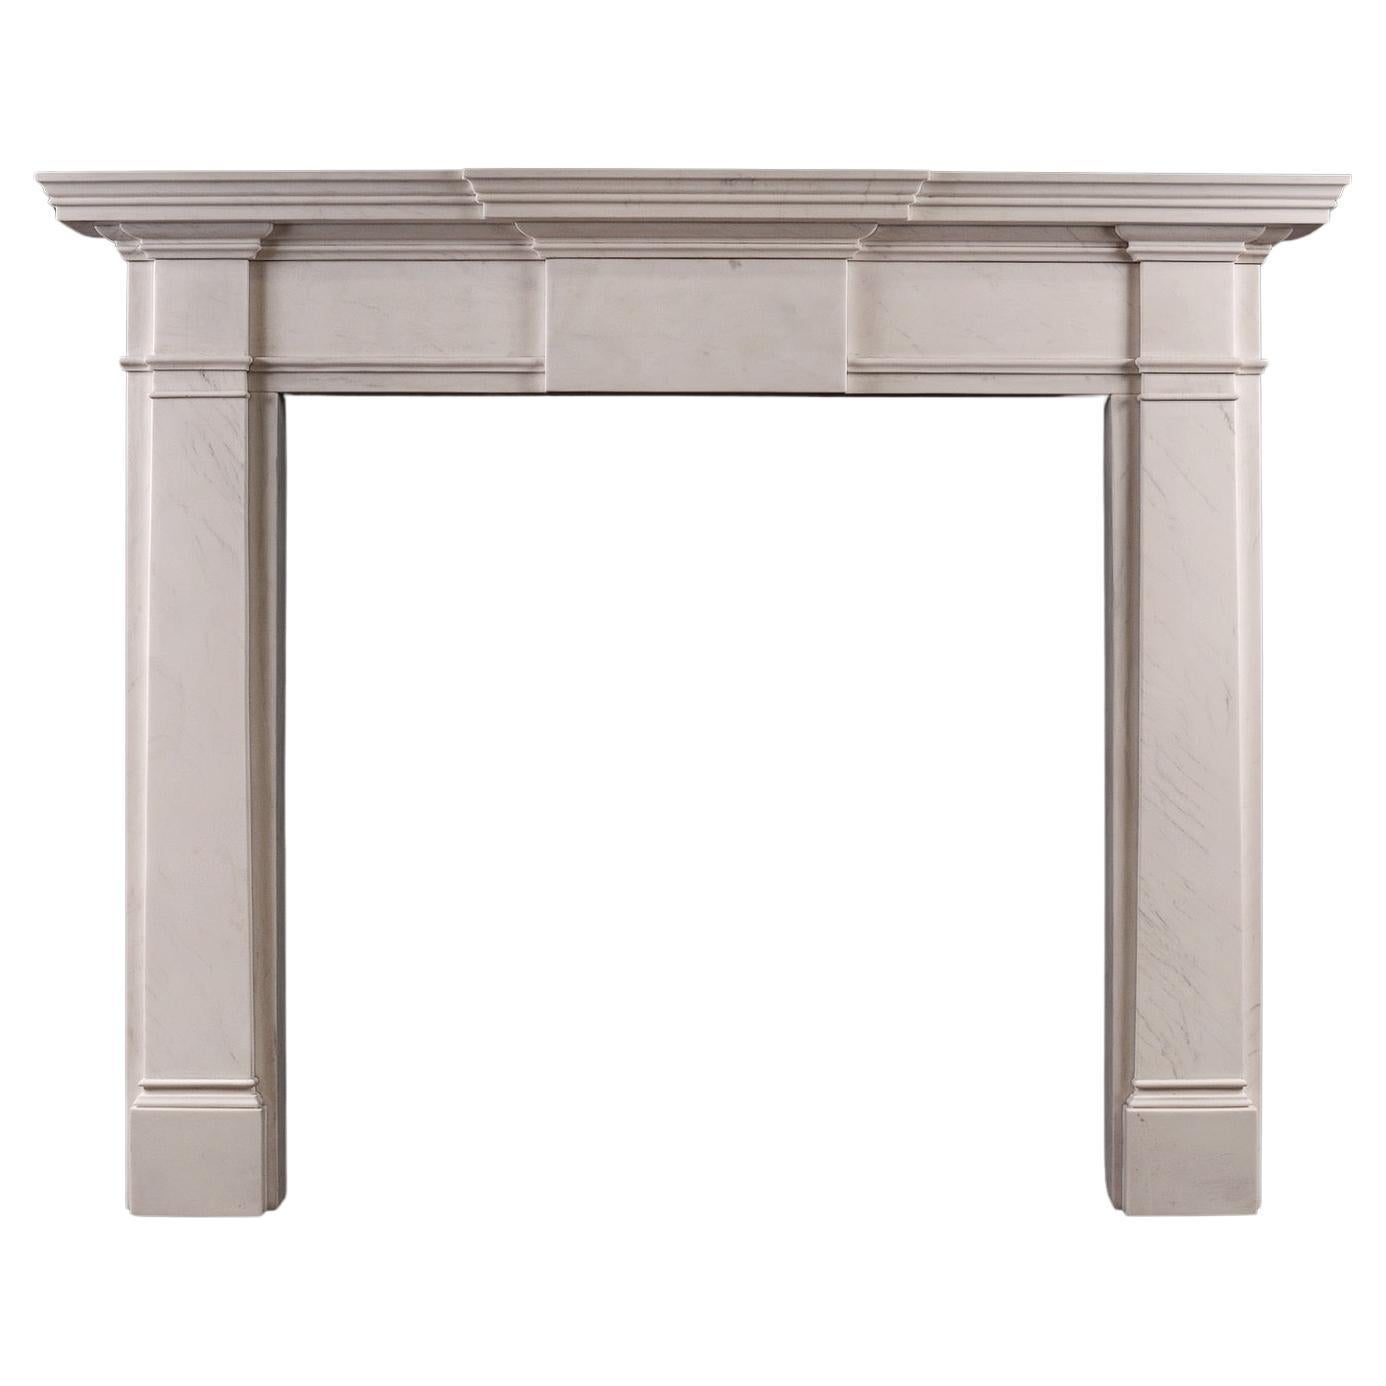 An Elegant English Fireplace in White Marble For Sale